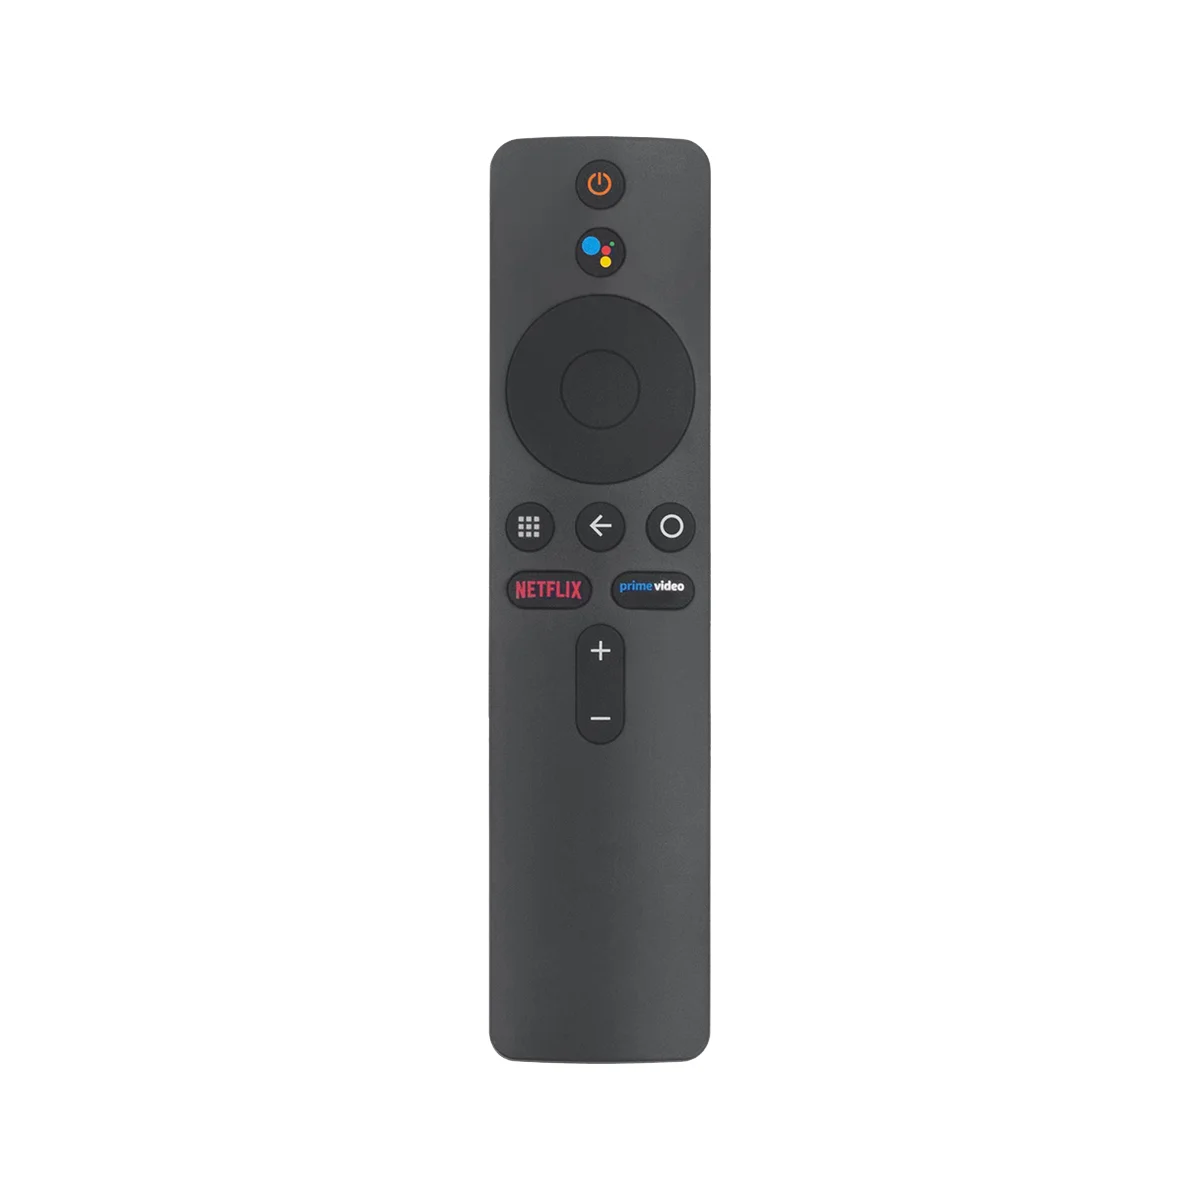 

XMRM-006A Voice Remote Control Replace for MDZ-24-AA 1080P HD Streaming Media Player